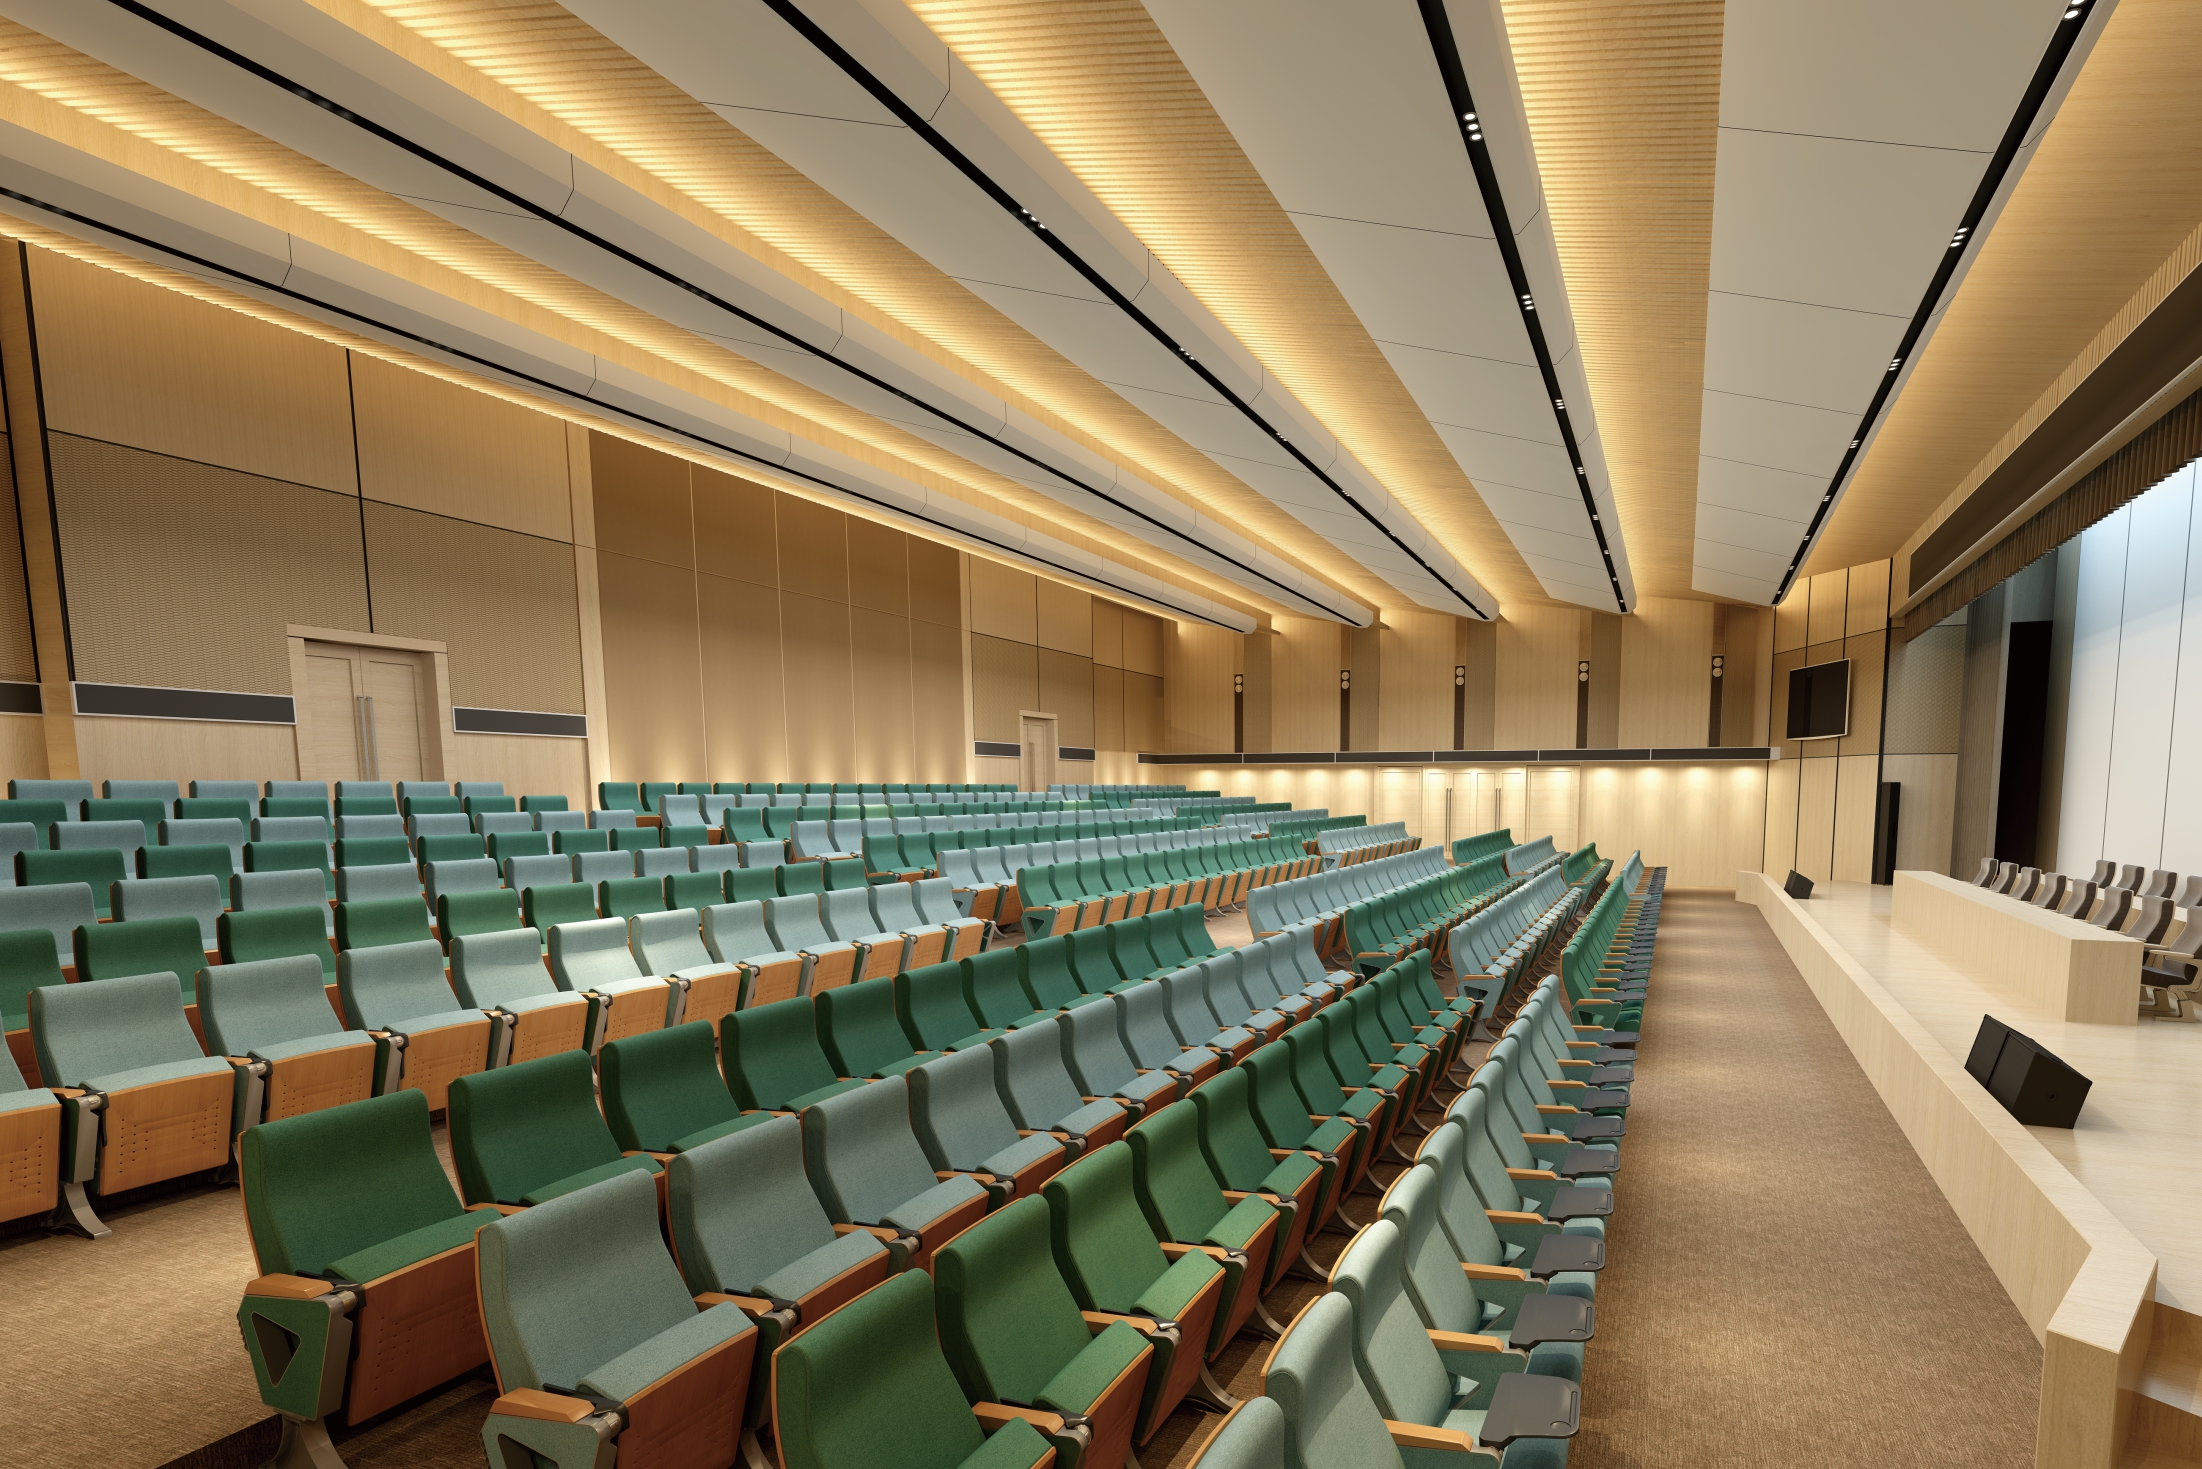 Spring Furniture Co., Ltd Leads Auditorium Seating Industry Evolution with Innovations and Trends